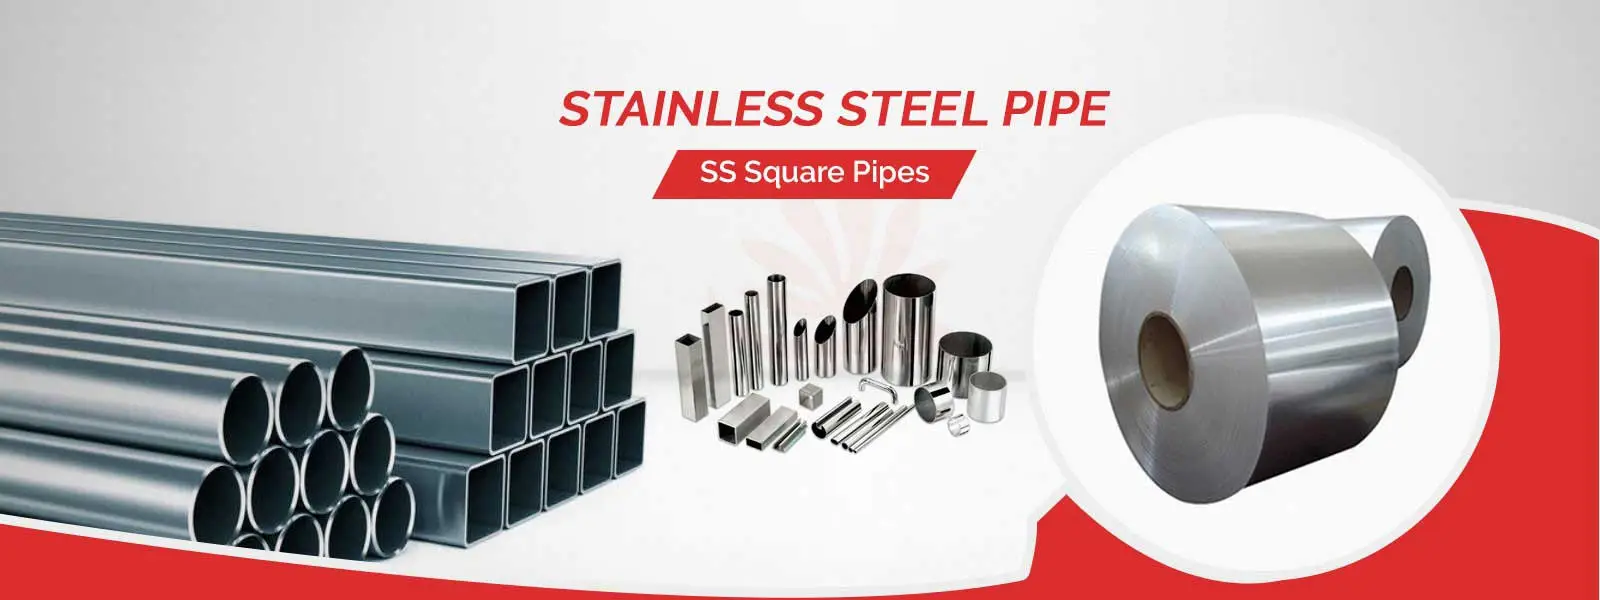 Stainless Steel Pipe Manufacturers in Ludhiana